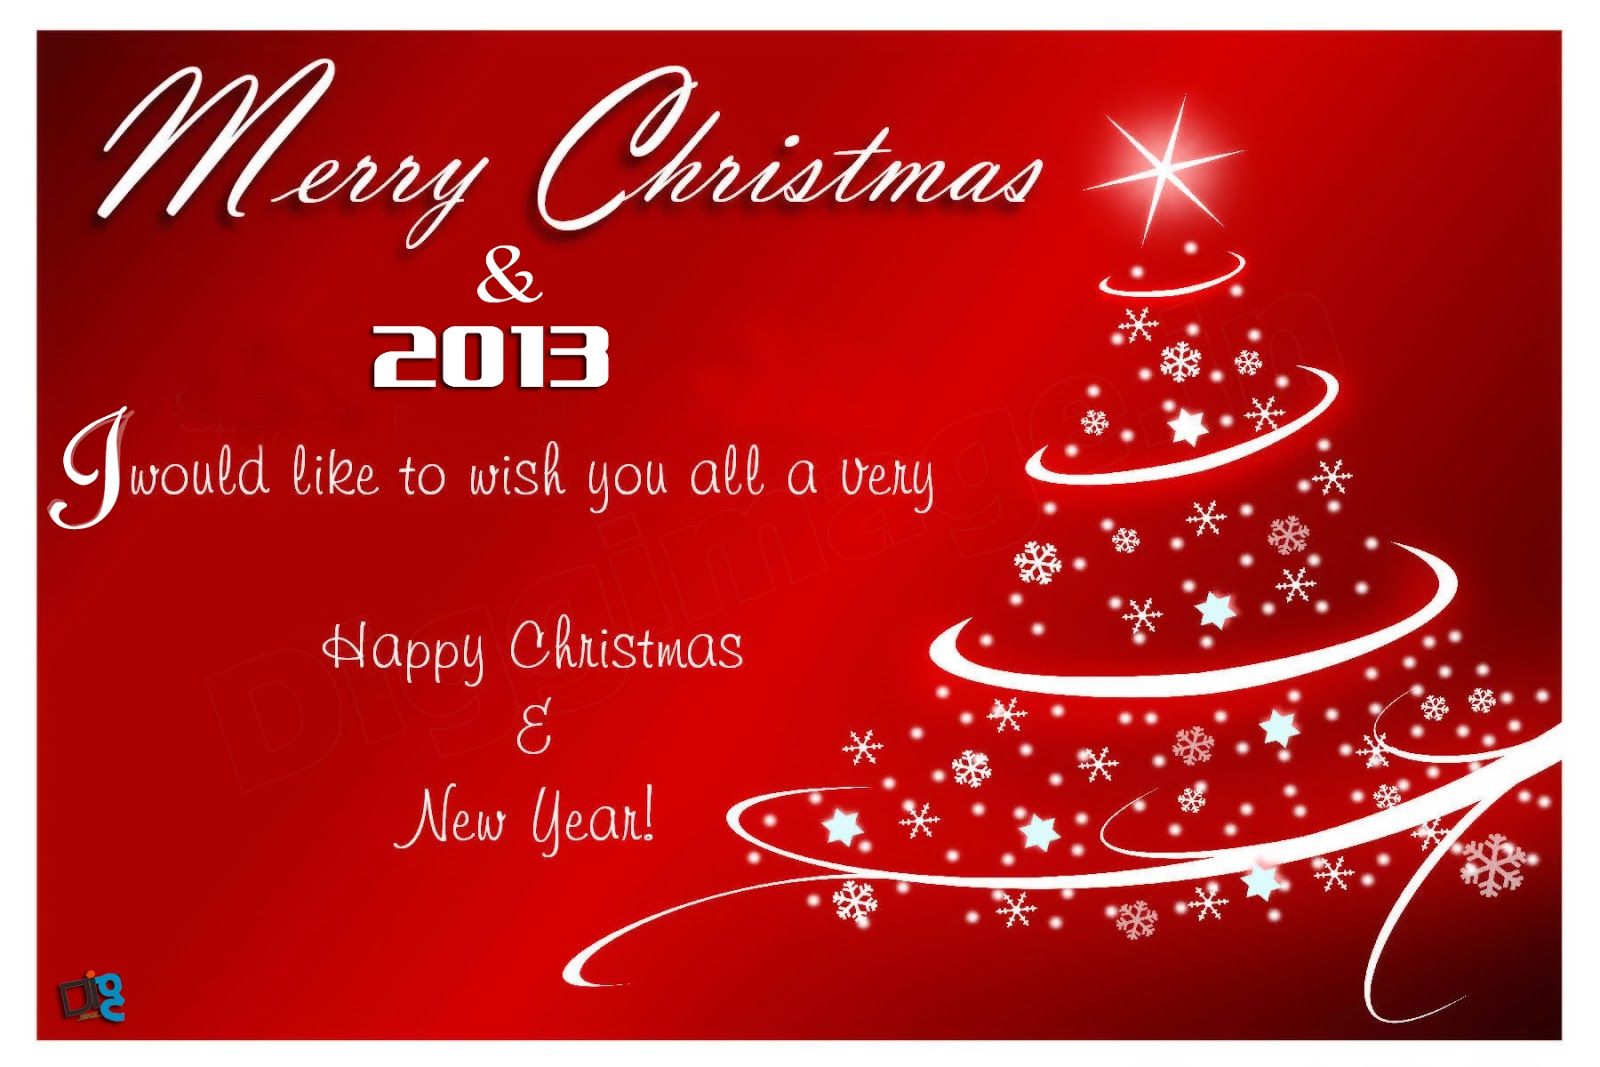 Euro Section 2012 2013 Family Christmas Greetings And Wallpaper Nad Happy New Year 2013